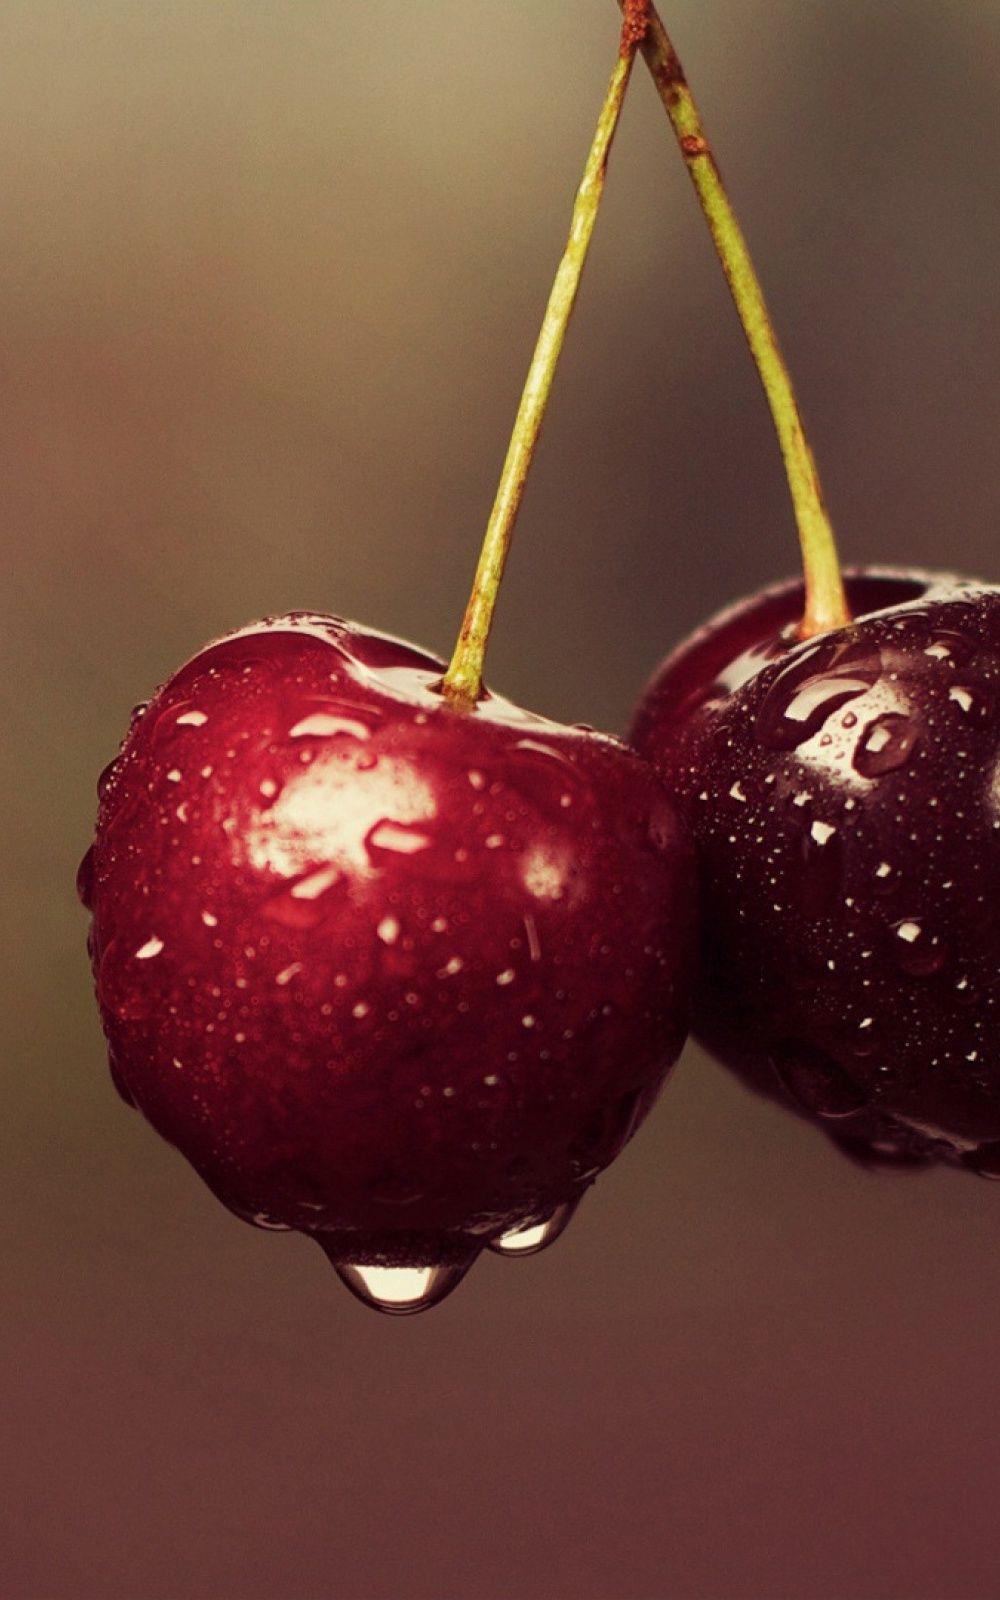 Cherry Mobile Wallpapers - Wallpaper Cave